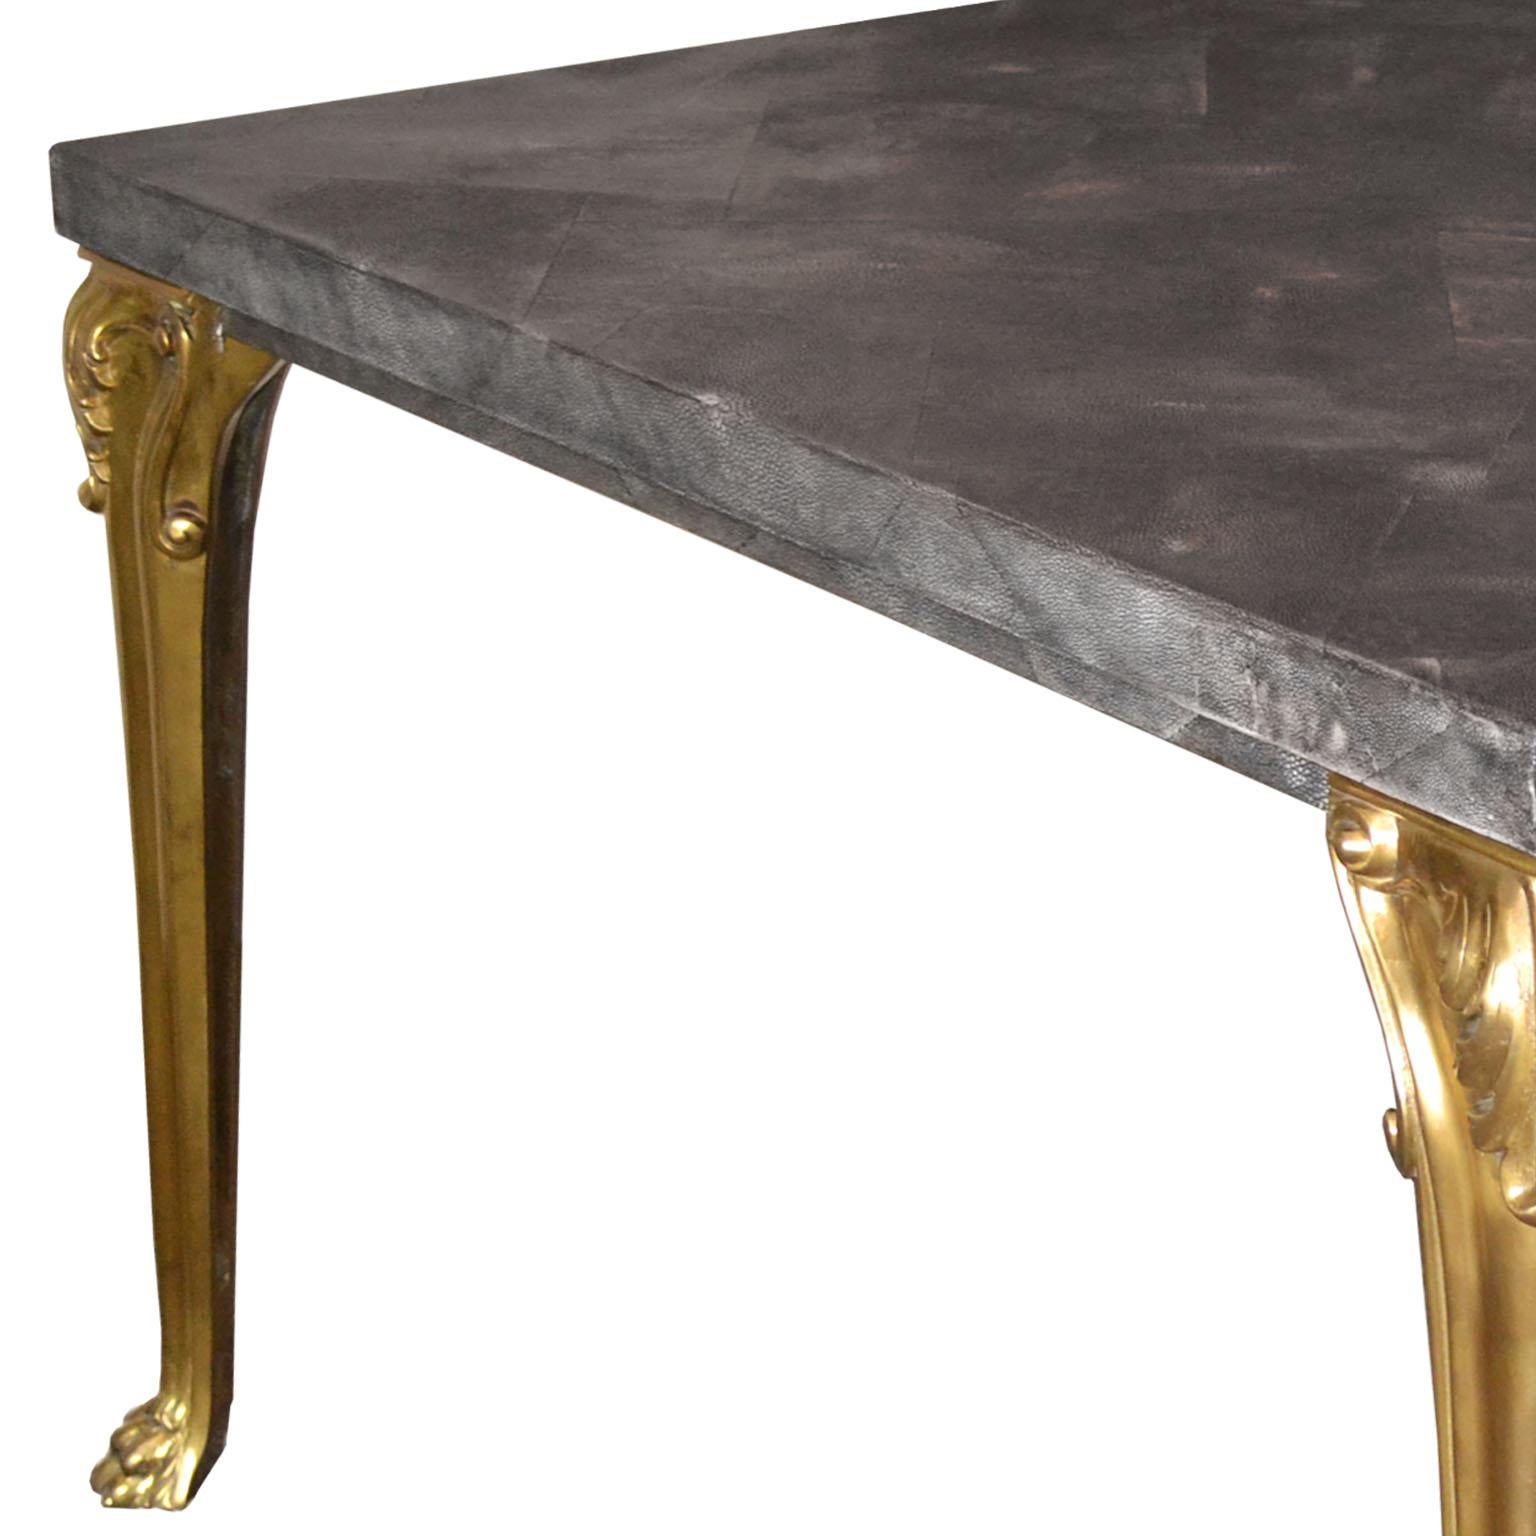 Modern Dining Table black scagliola shagreen top  casted brass legs handmade in Italy For Sale